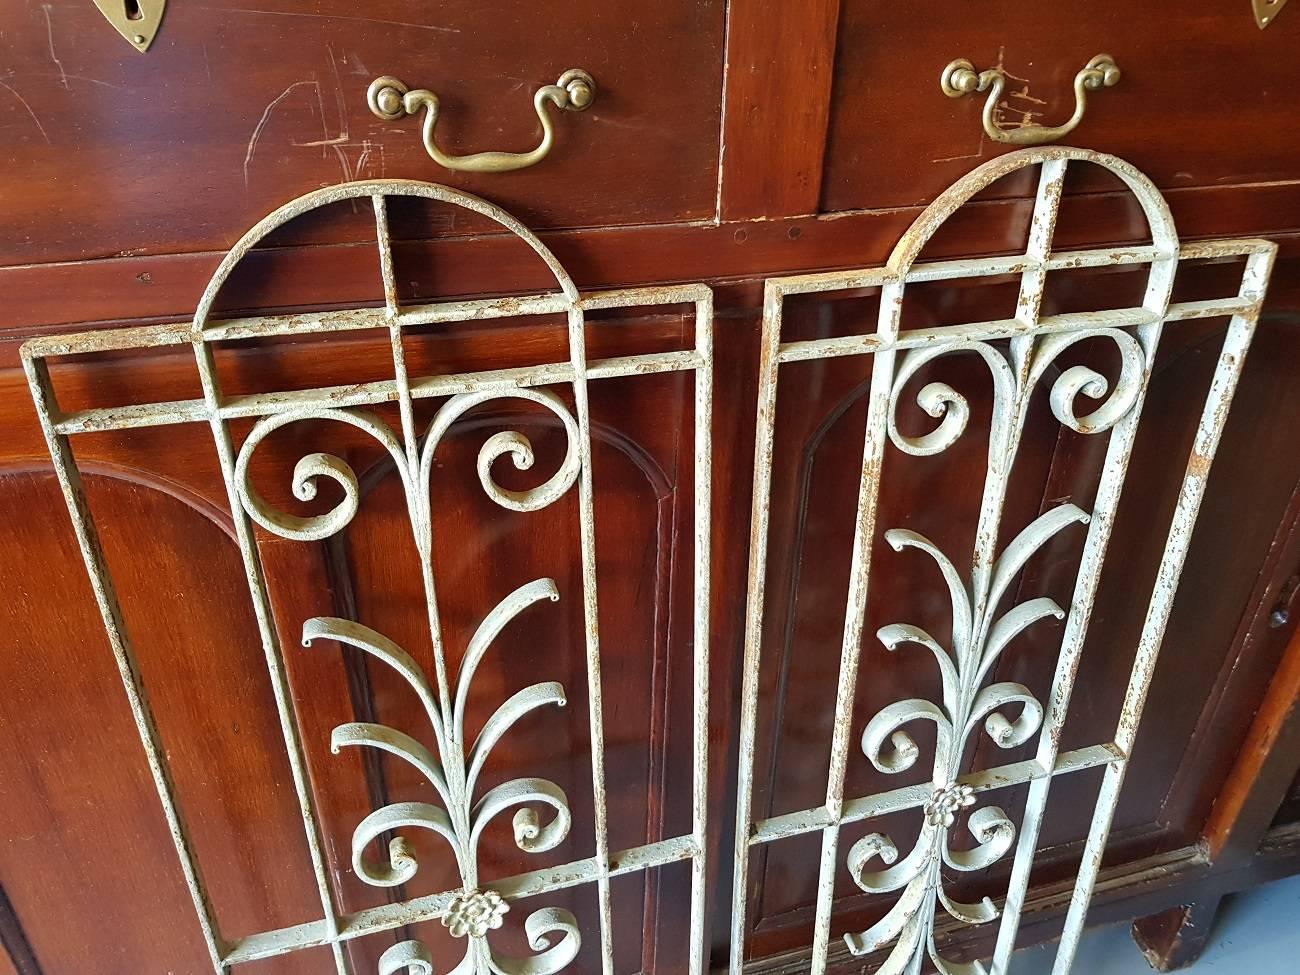 Set of two beautiful vintage French metal door grills or fences from the mid-20th century.

The measurements are,
Depth 2 cm/ 0.7 inch.
Width 37 cm/ 14.5 inch.
Height 106.5 cm/ 41.9 inch.
    